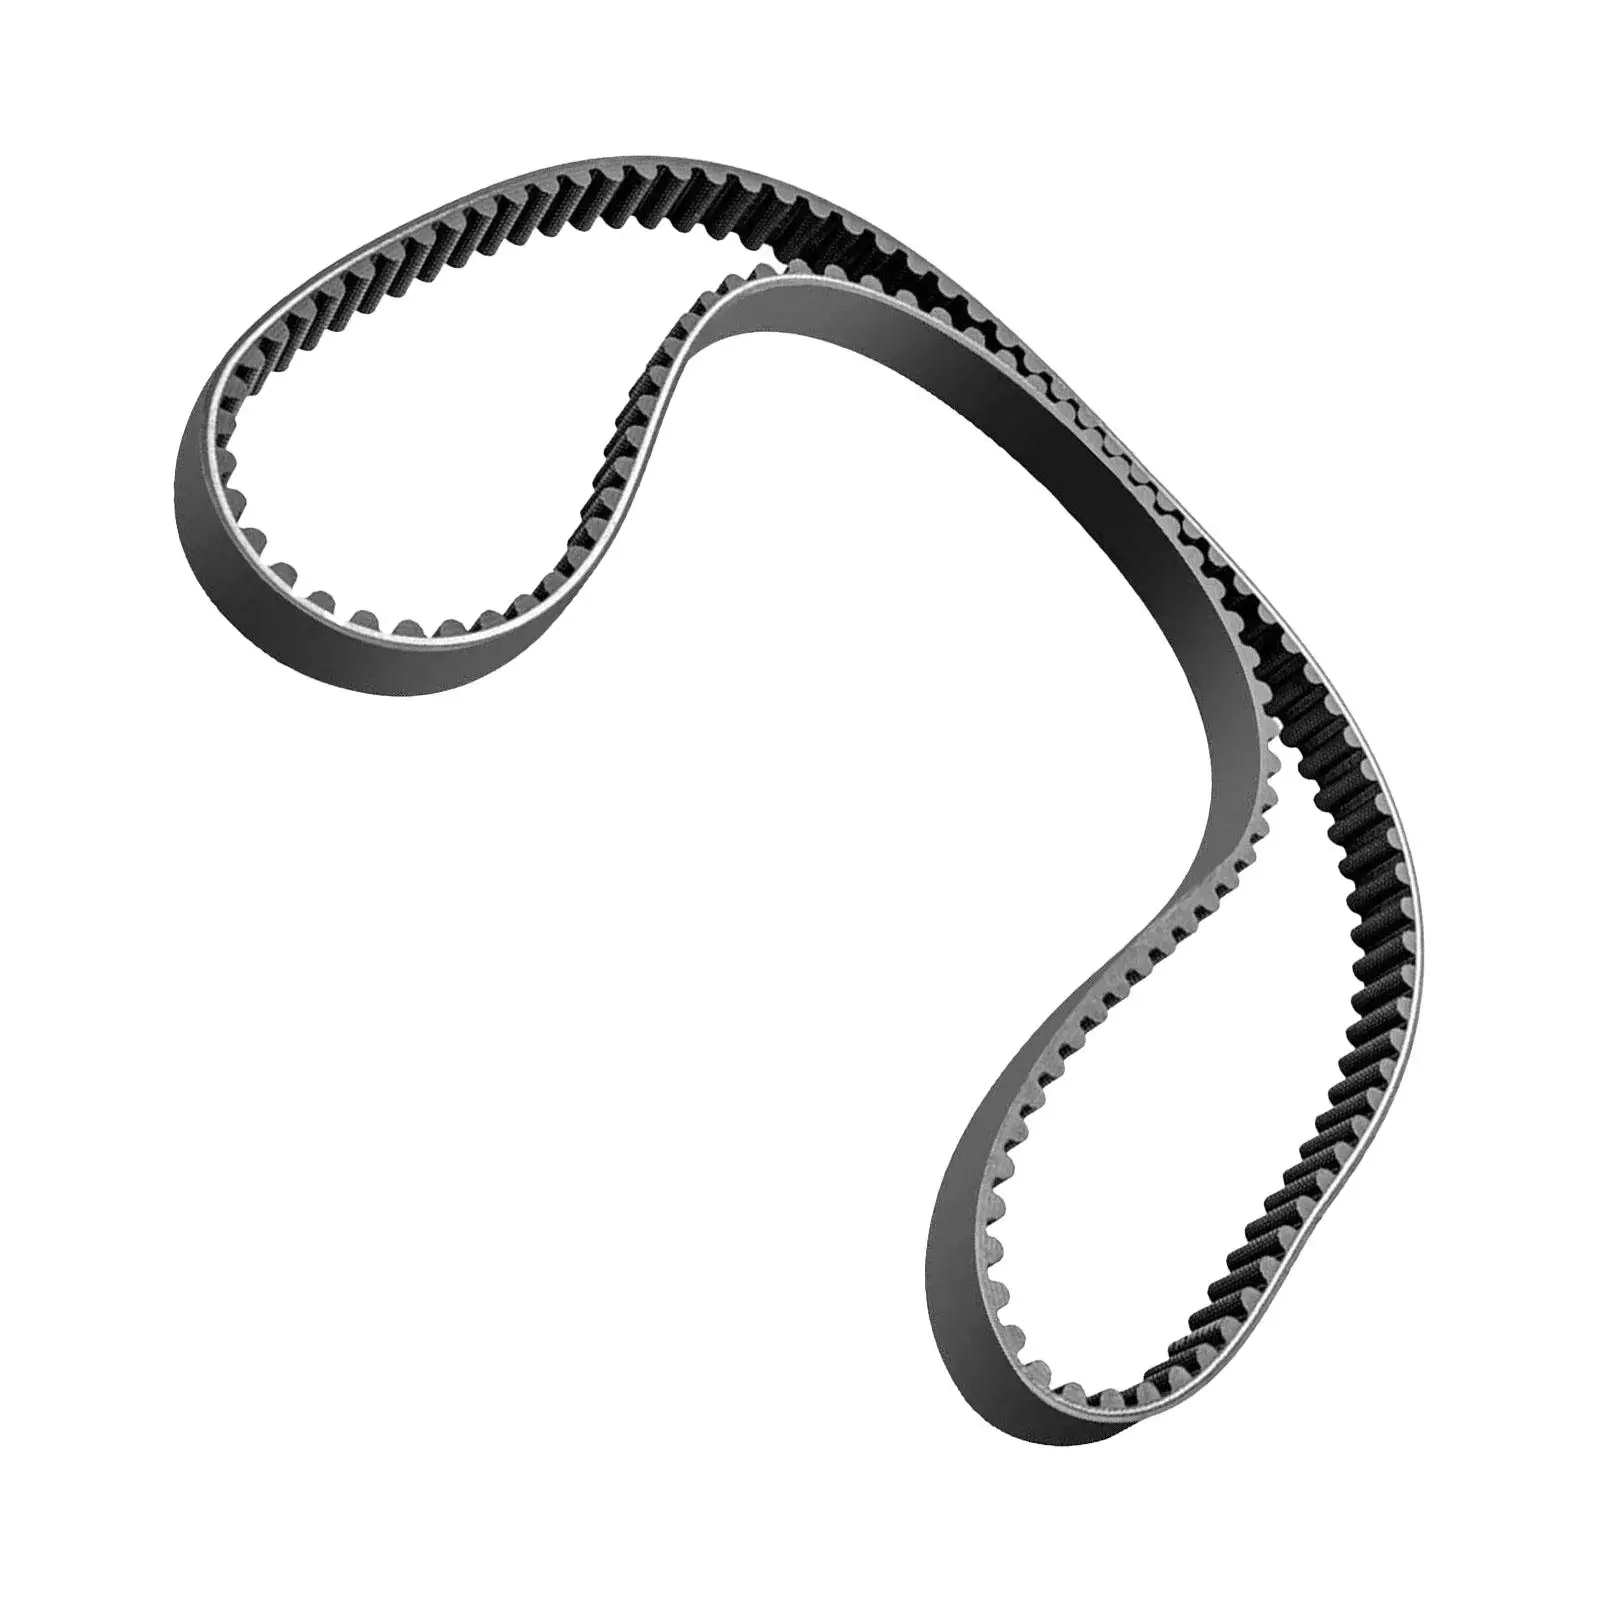 

40001-84 Accessories Premium High Performance Drive Rear Belt 136 Tooth 1 1/2" Replaces for 1985-96 FLT, Flht 1985-94 Fxr